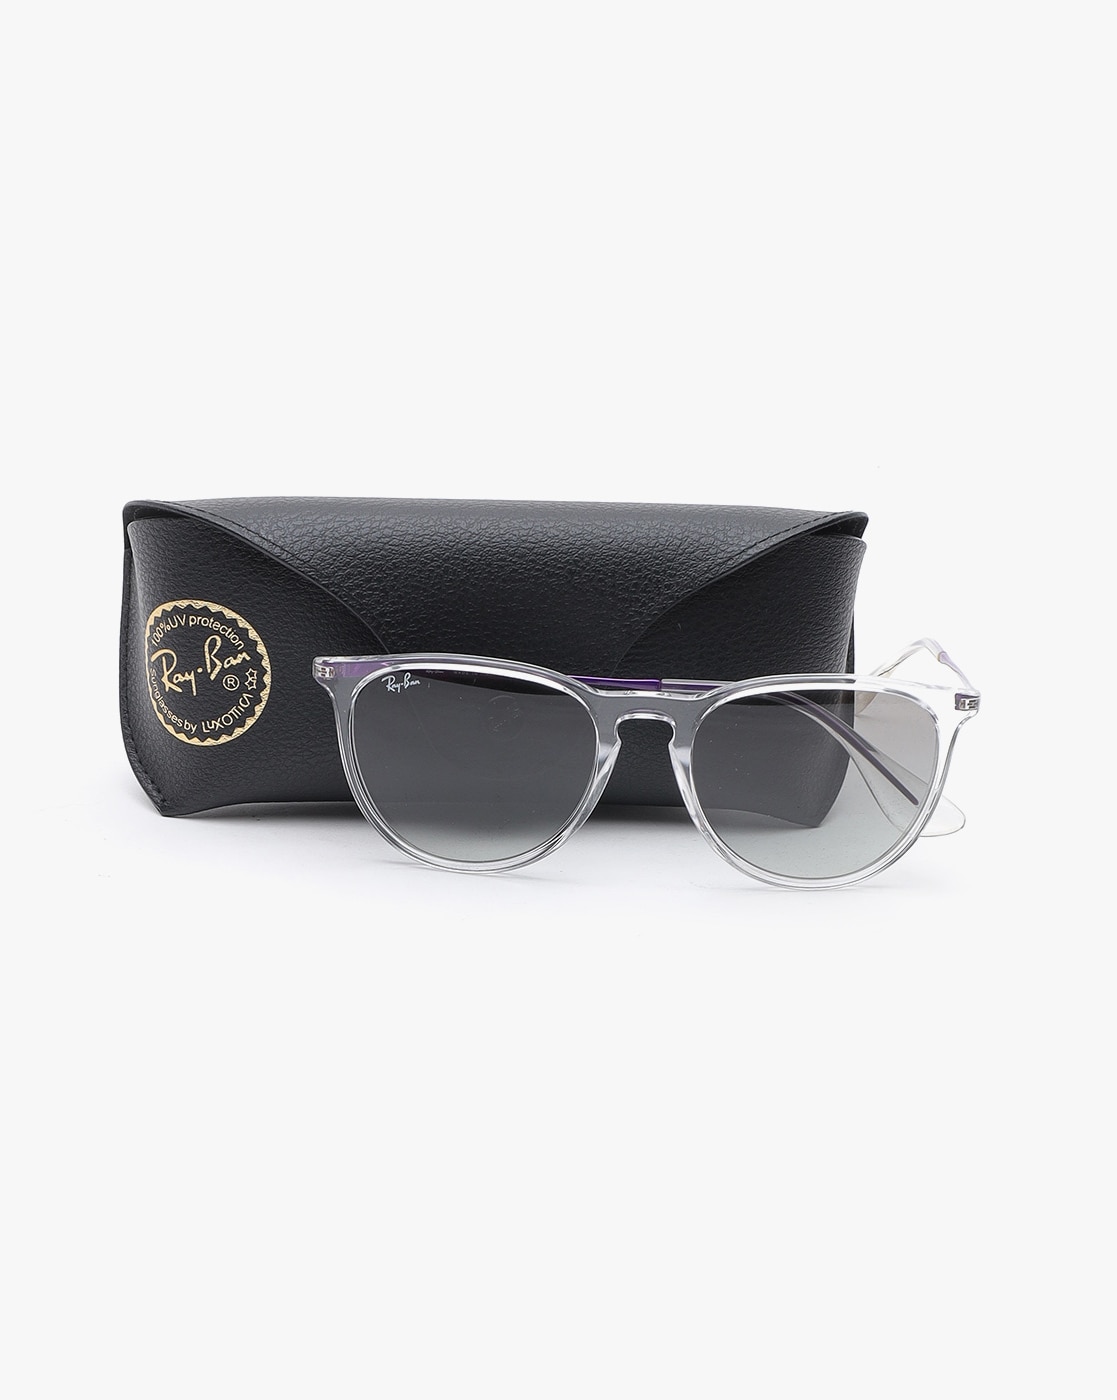 Buy Clear Sunglasses for Women by Ray Ban Online 